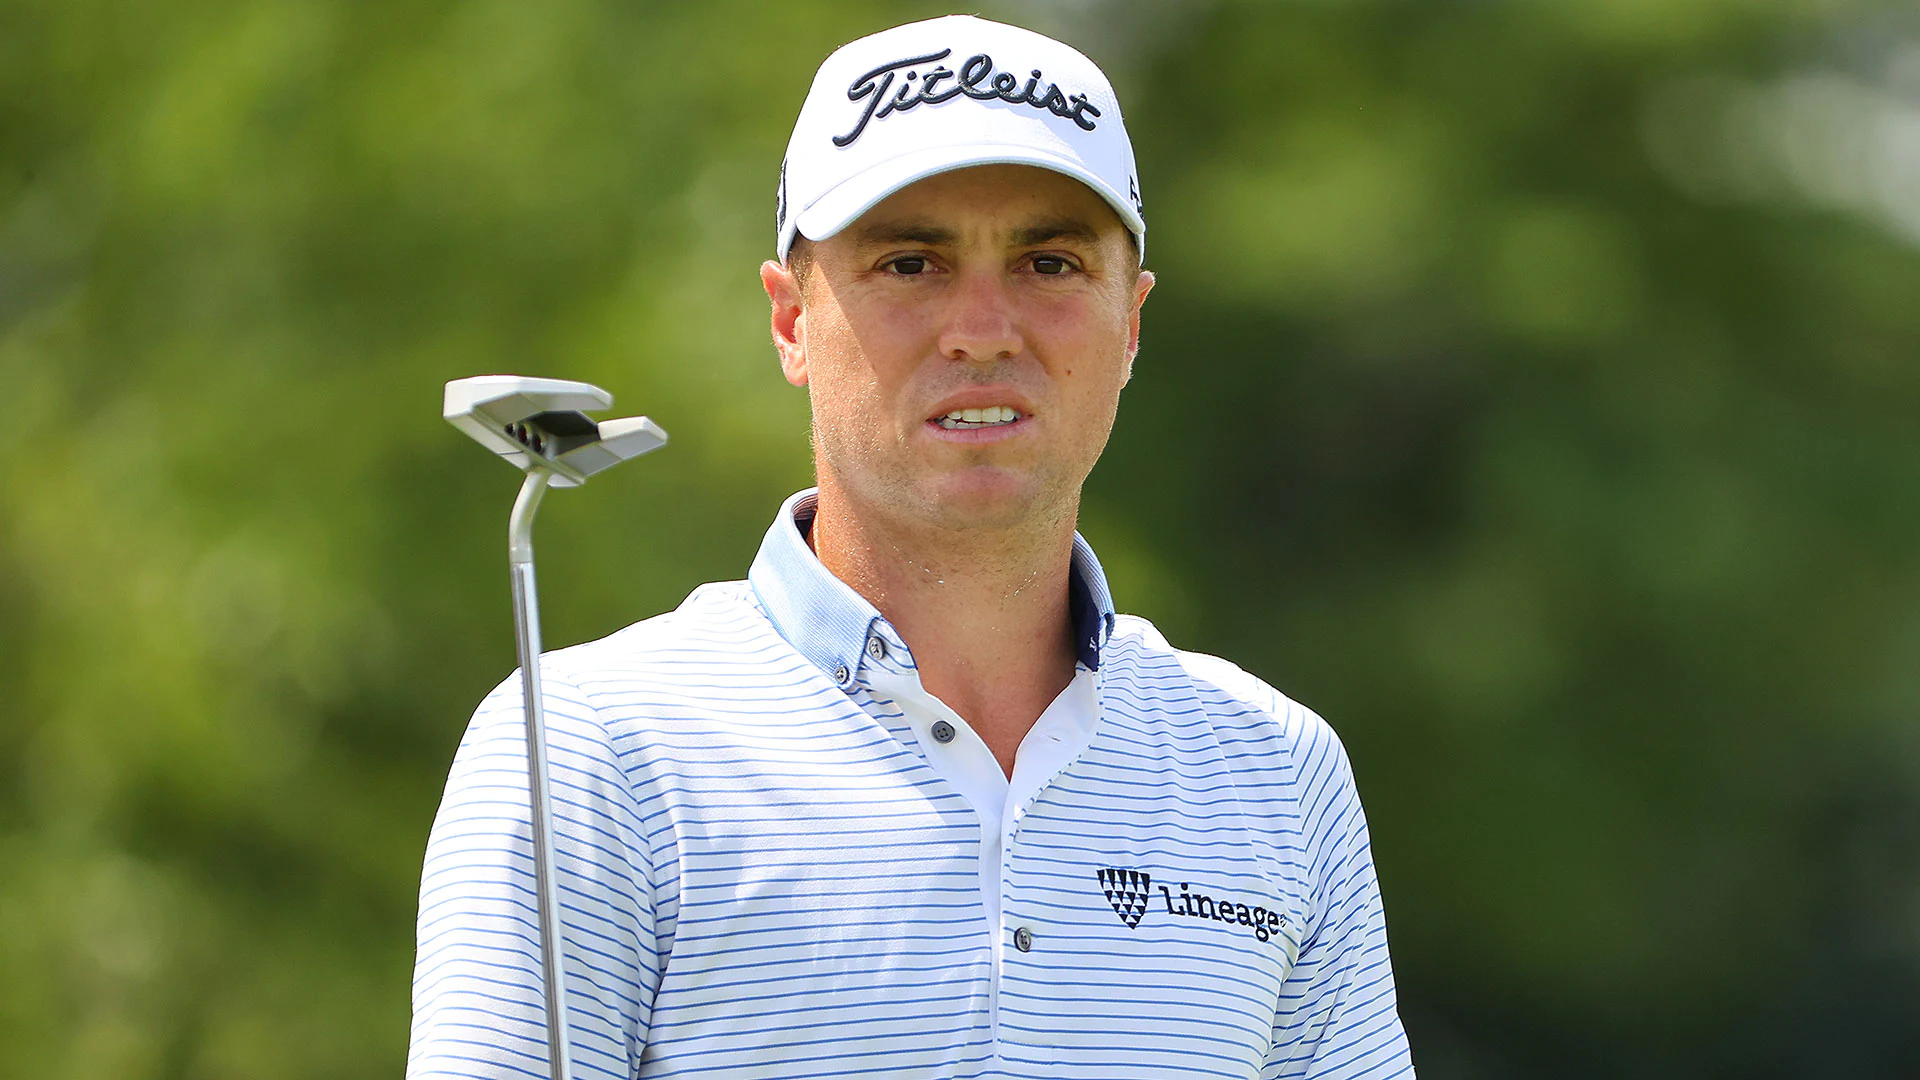 ‘Baby’ Love: Justin Thomas makes up with old putter, grabs share of Northern Trust lead